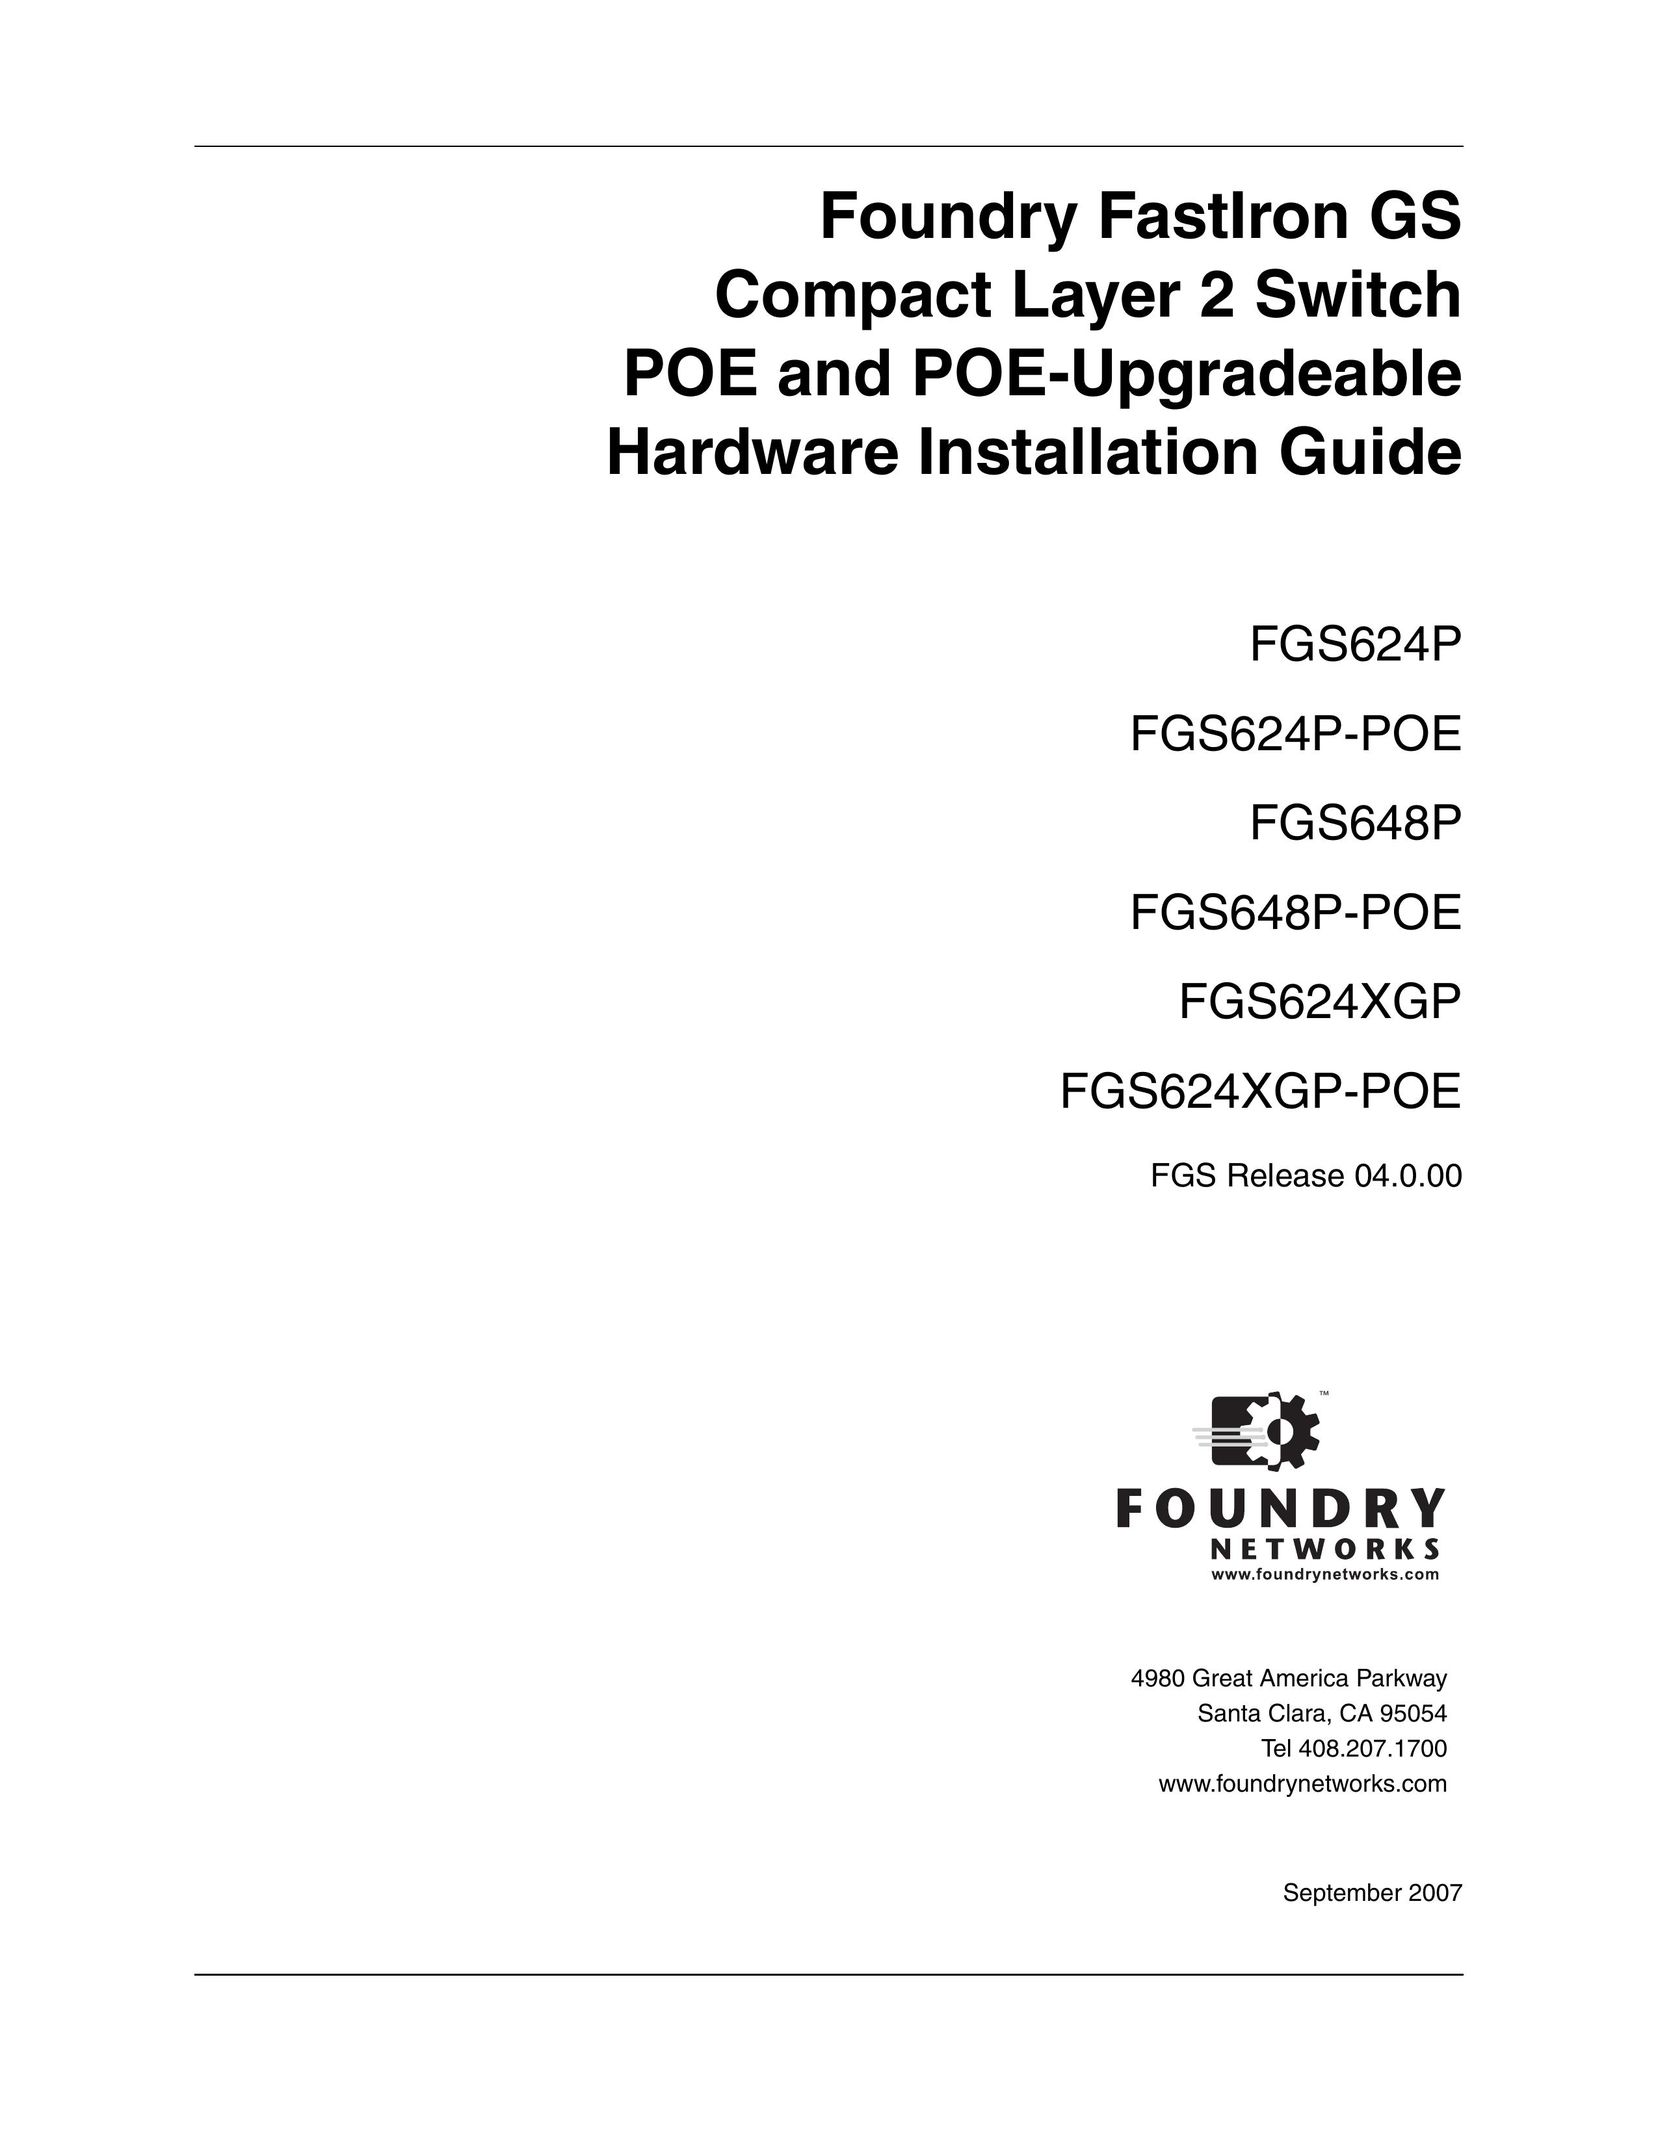 Foundry Networks FGS624P Network Hardware User Manual